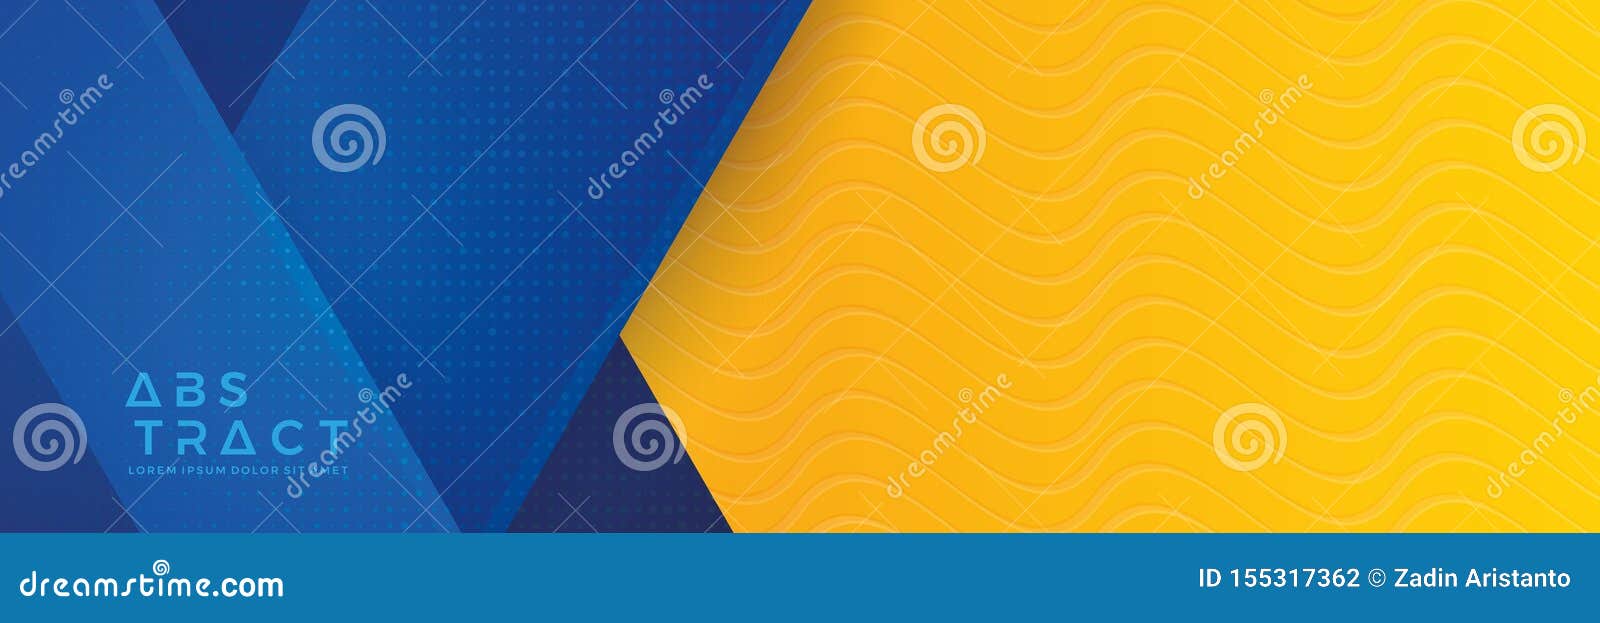 blue background with orange and yellow color composition in abstract. abstract backgrounds with a combination of lines and circle